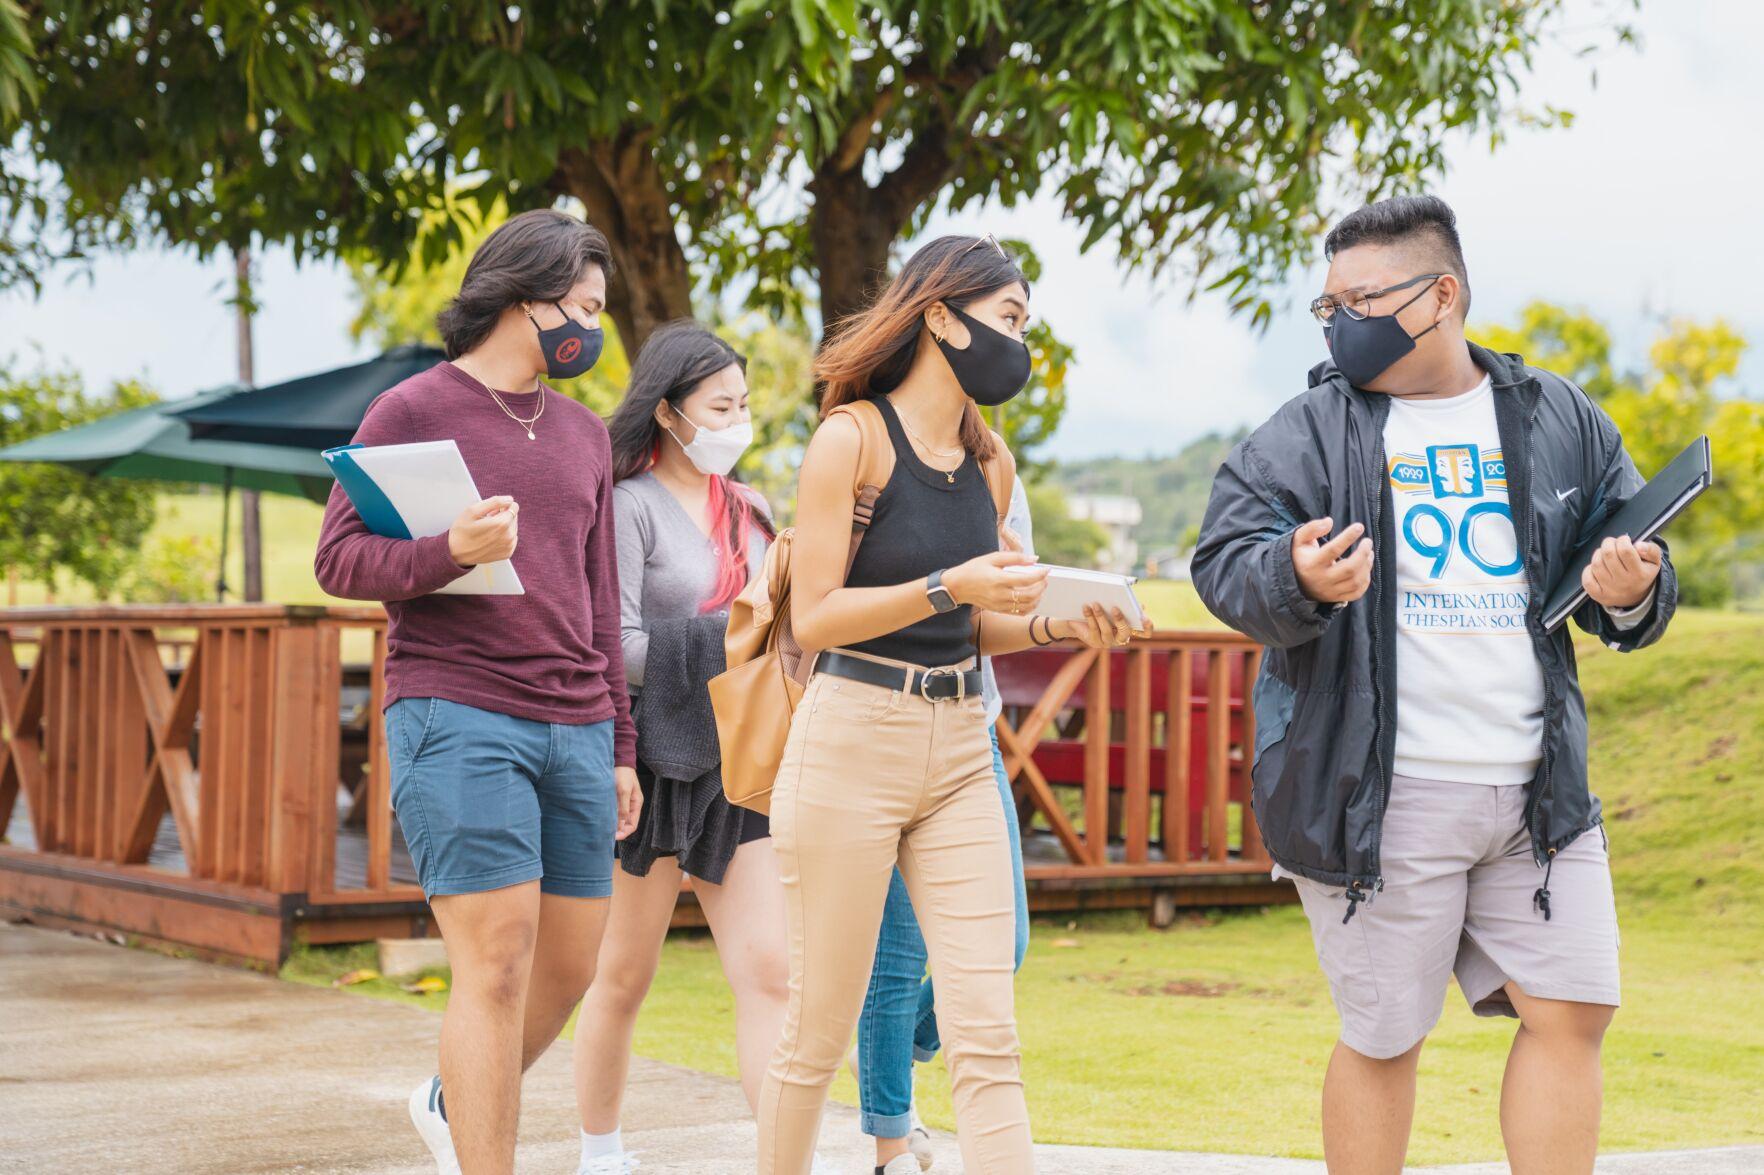 Northern Marianas College recently kicked off its Fall 2021 semester with an increase in enrollment. The college welcomed close to 1,300 students this semester.